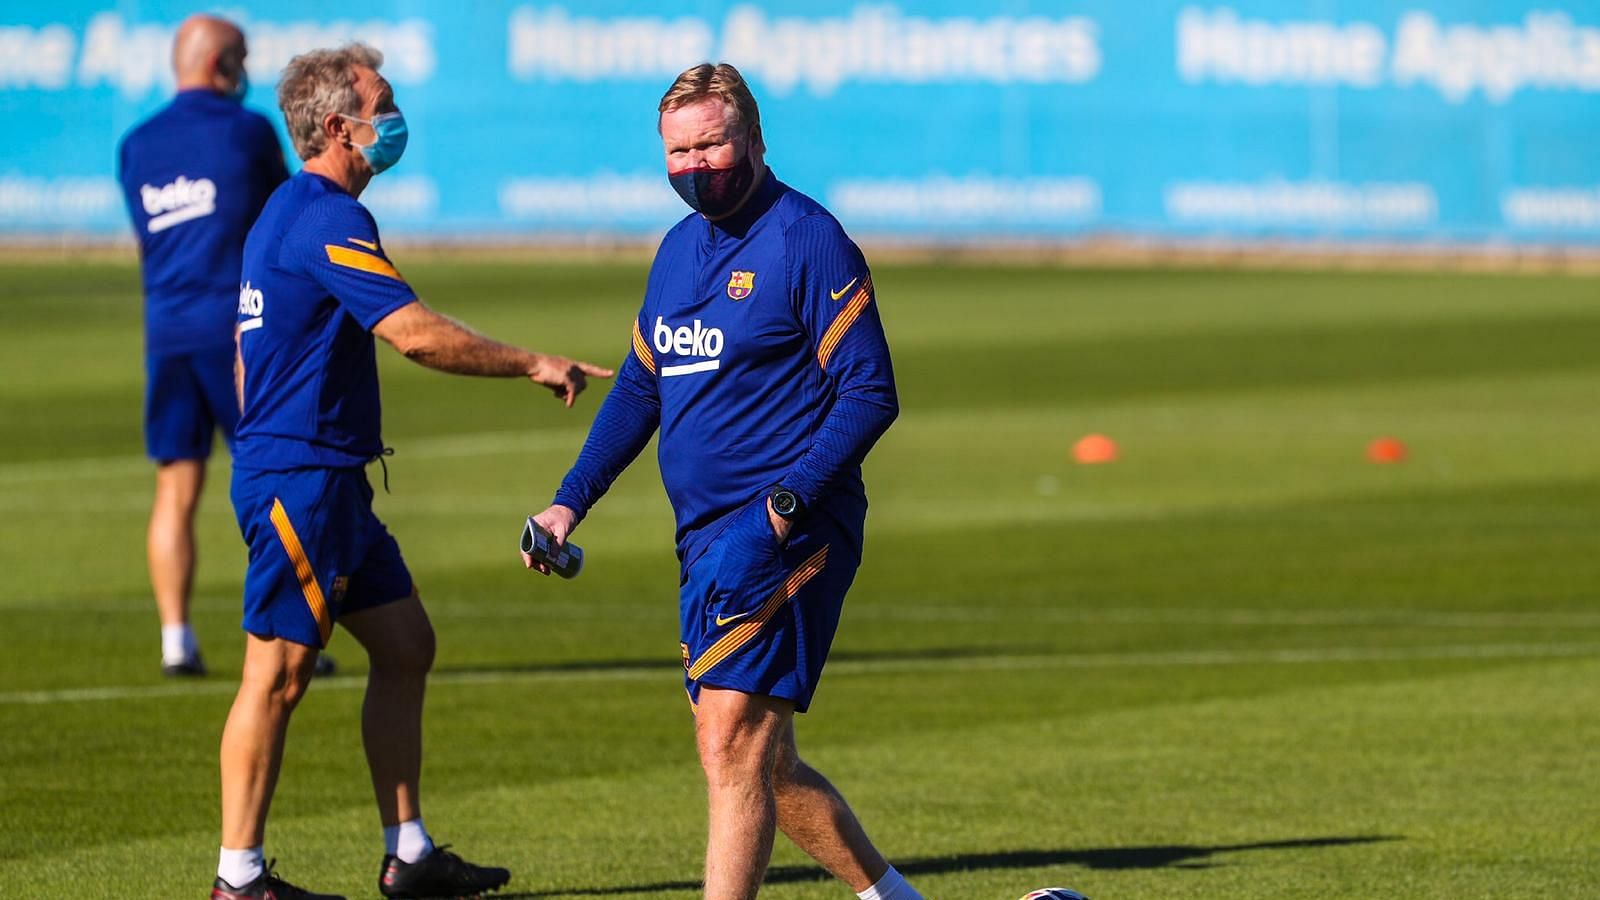 FC Barcelona have begun their training under new coach Ronald Koeman but as expected, star striker Lionel Messi was missing.